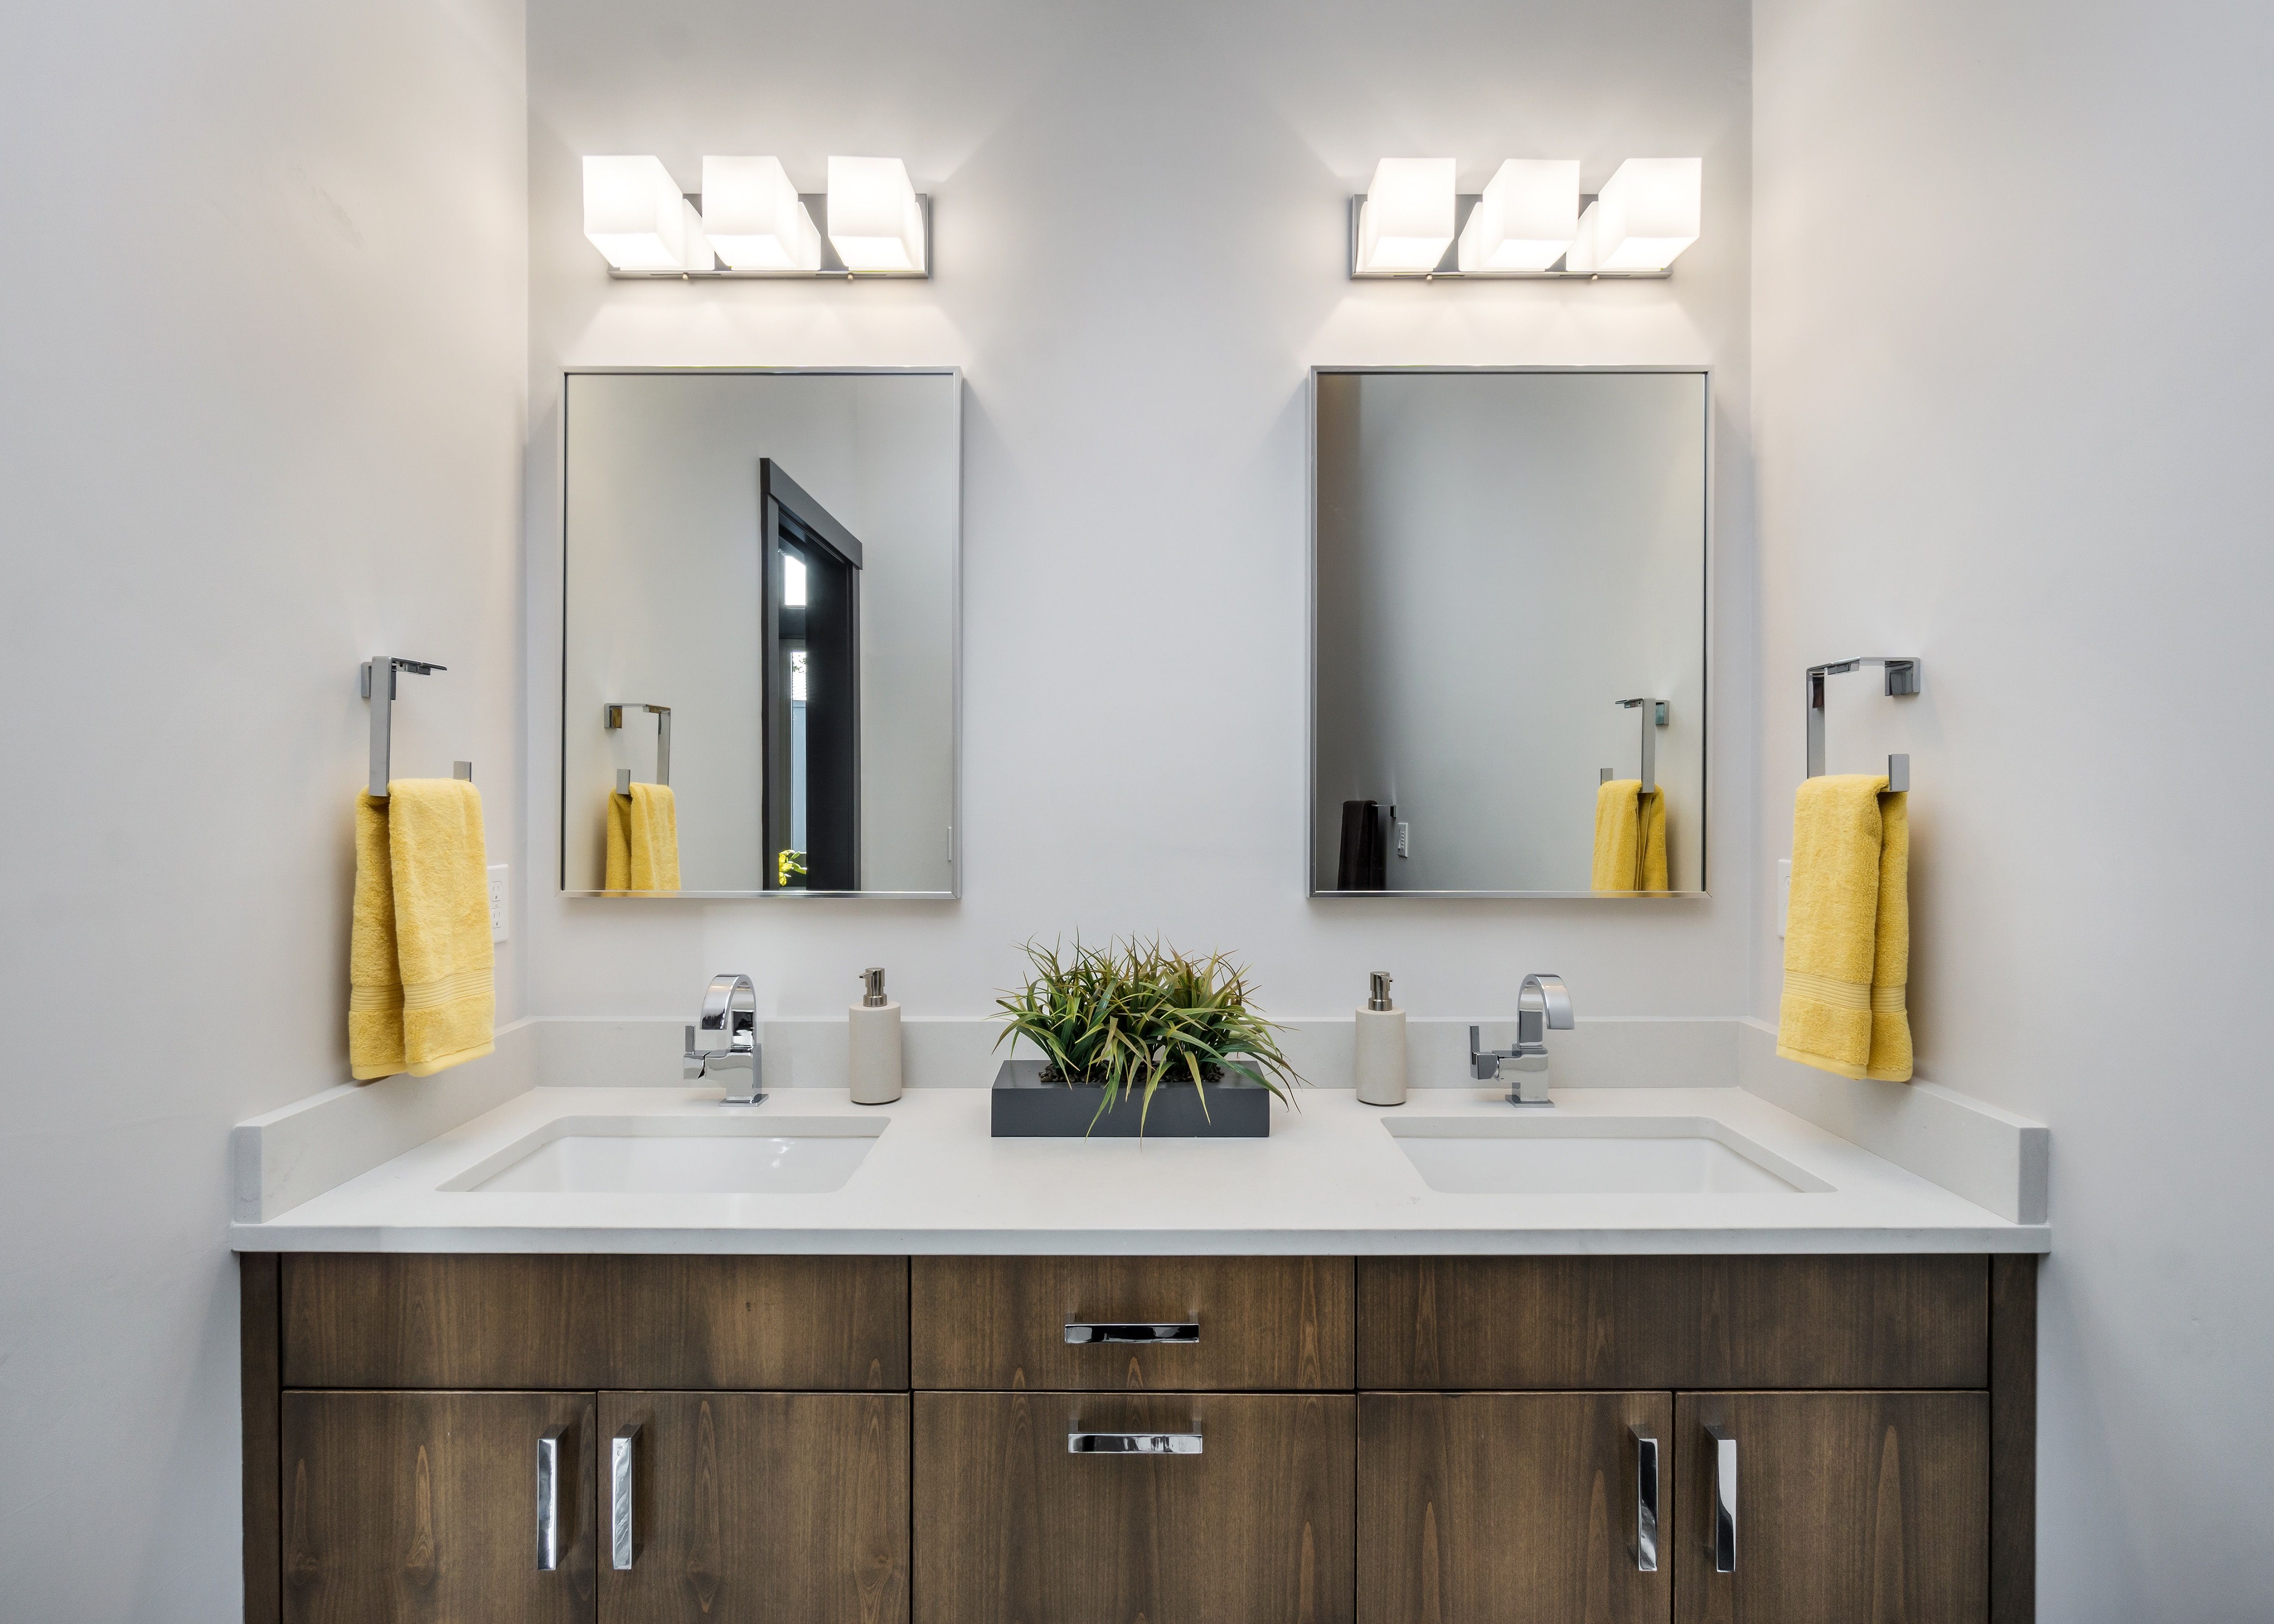 Modern Bathroom Cabinet Furniture With Double Sinks And Mirrors (View 18 of 18)